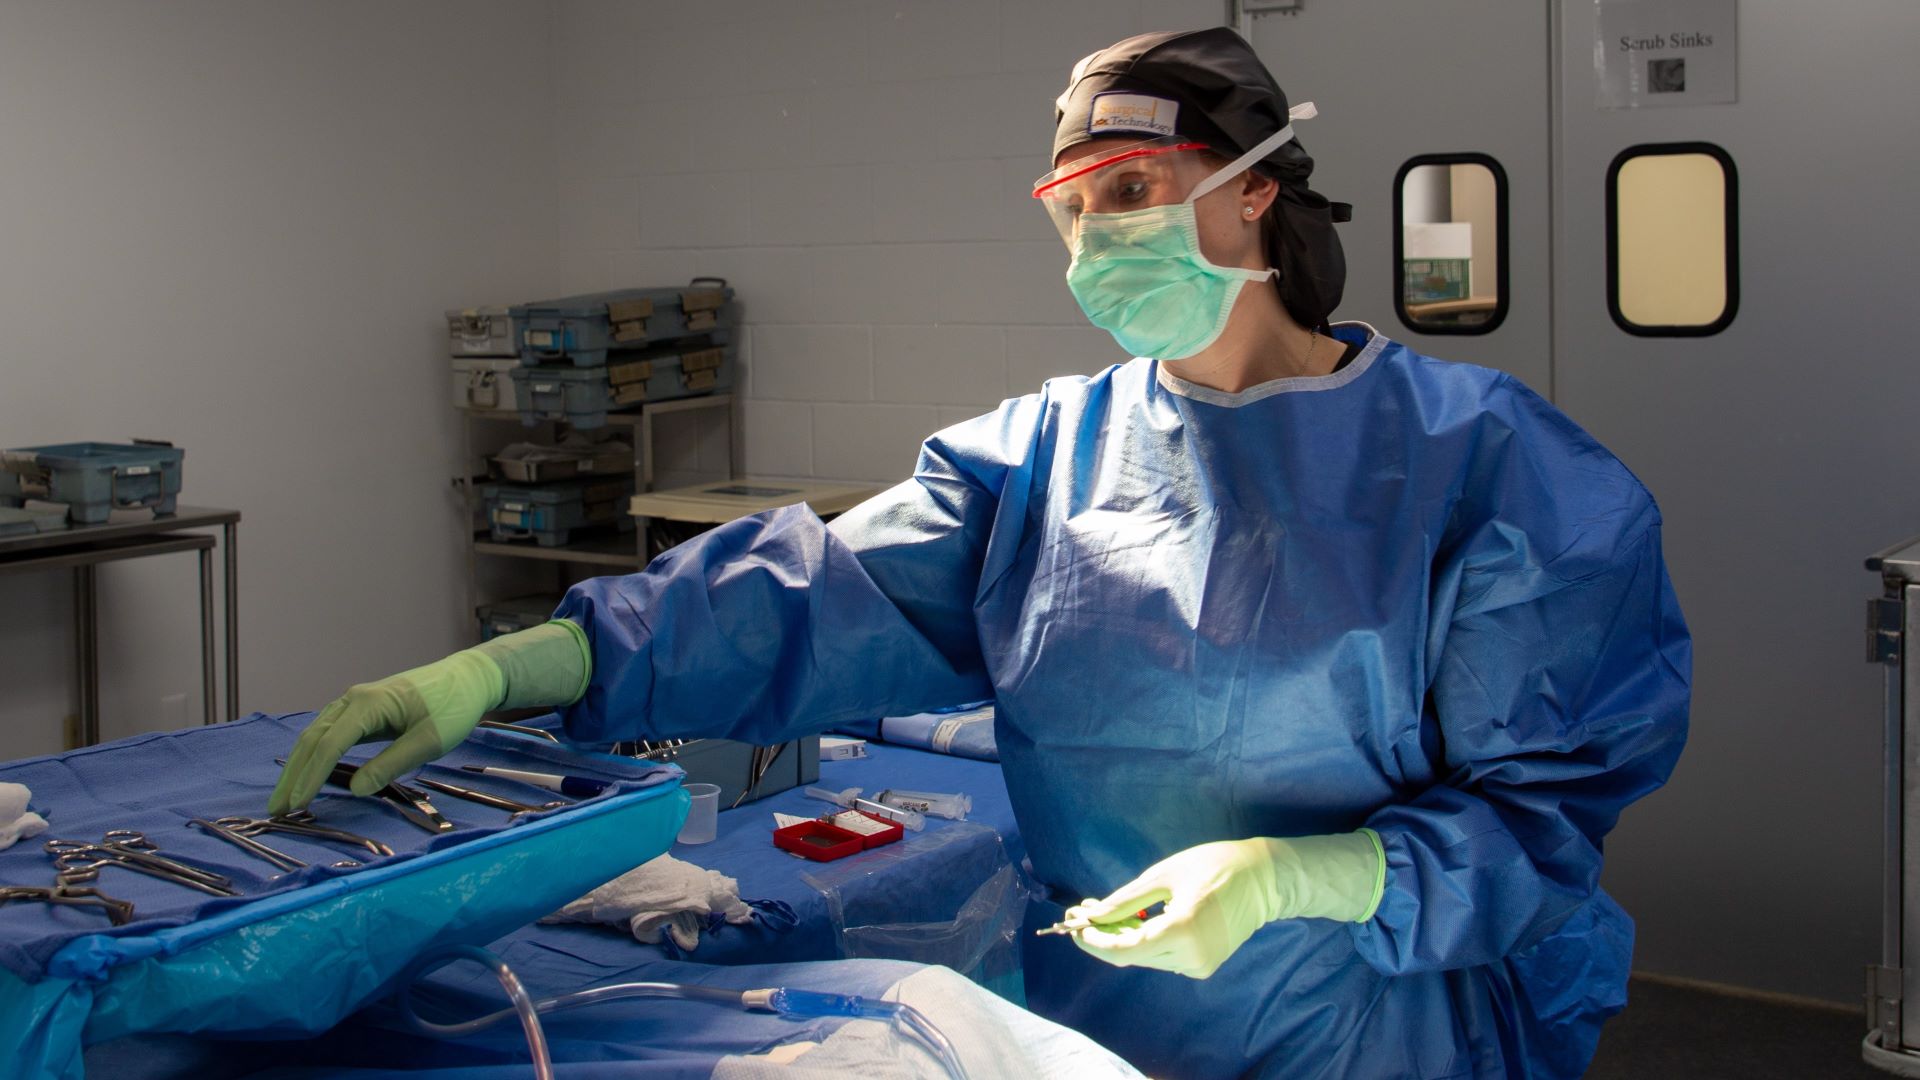 Tisha Clark, wearing surgical scrubs, demonstrates a surgical procedure at Eastern Maine Community College.